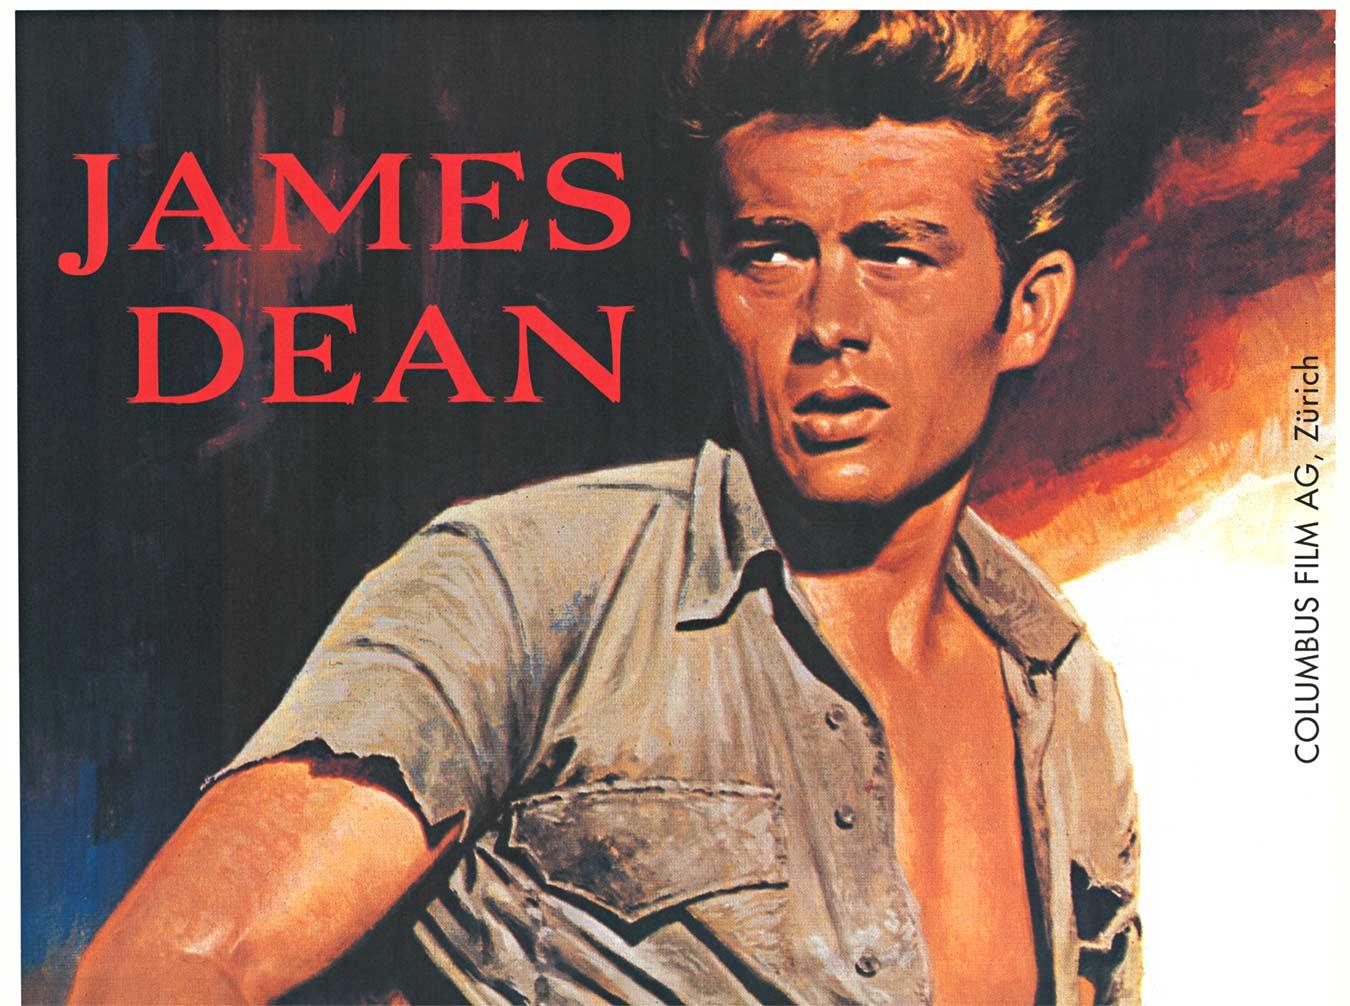 Original James Dean  Rebel Without a Cause vintage Swiss movie poster - Print by Unknown